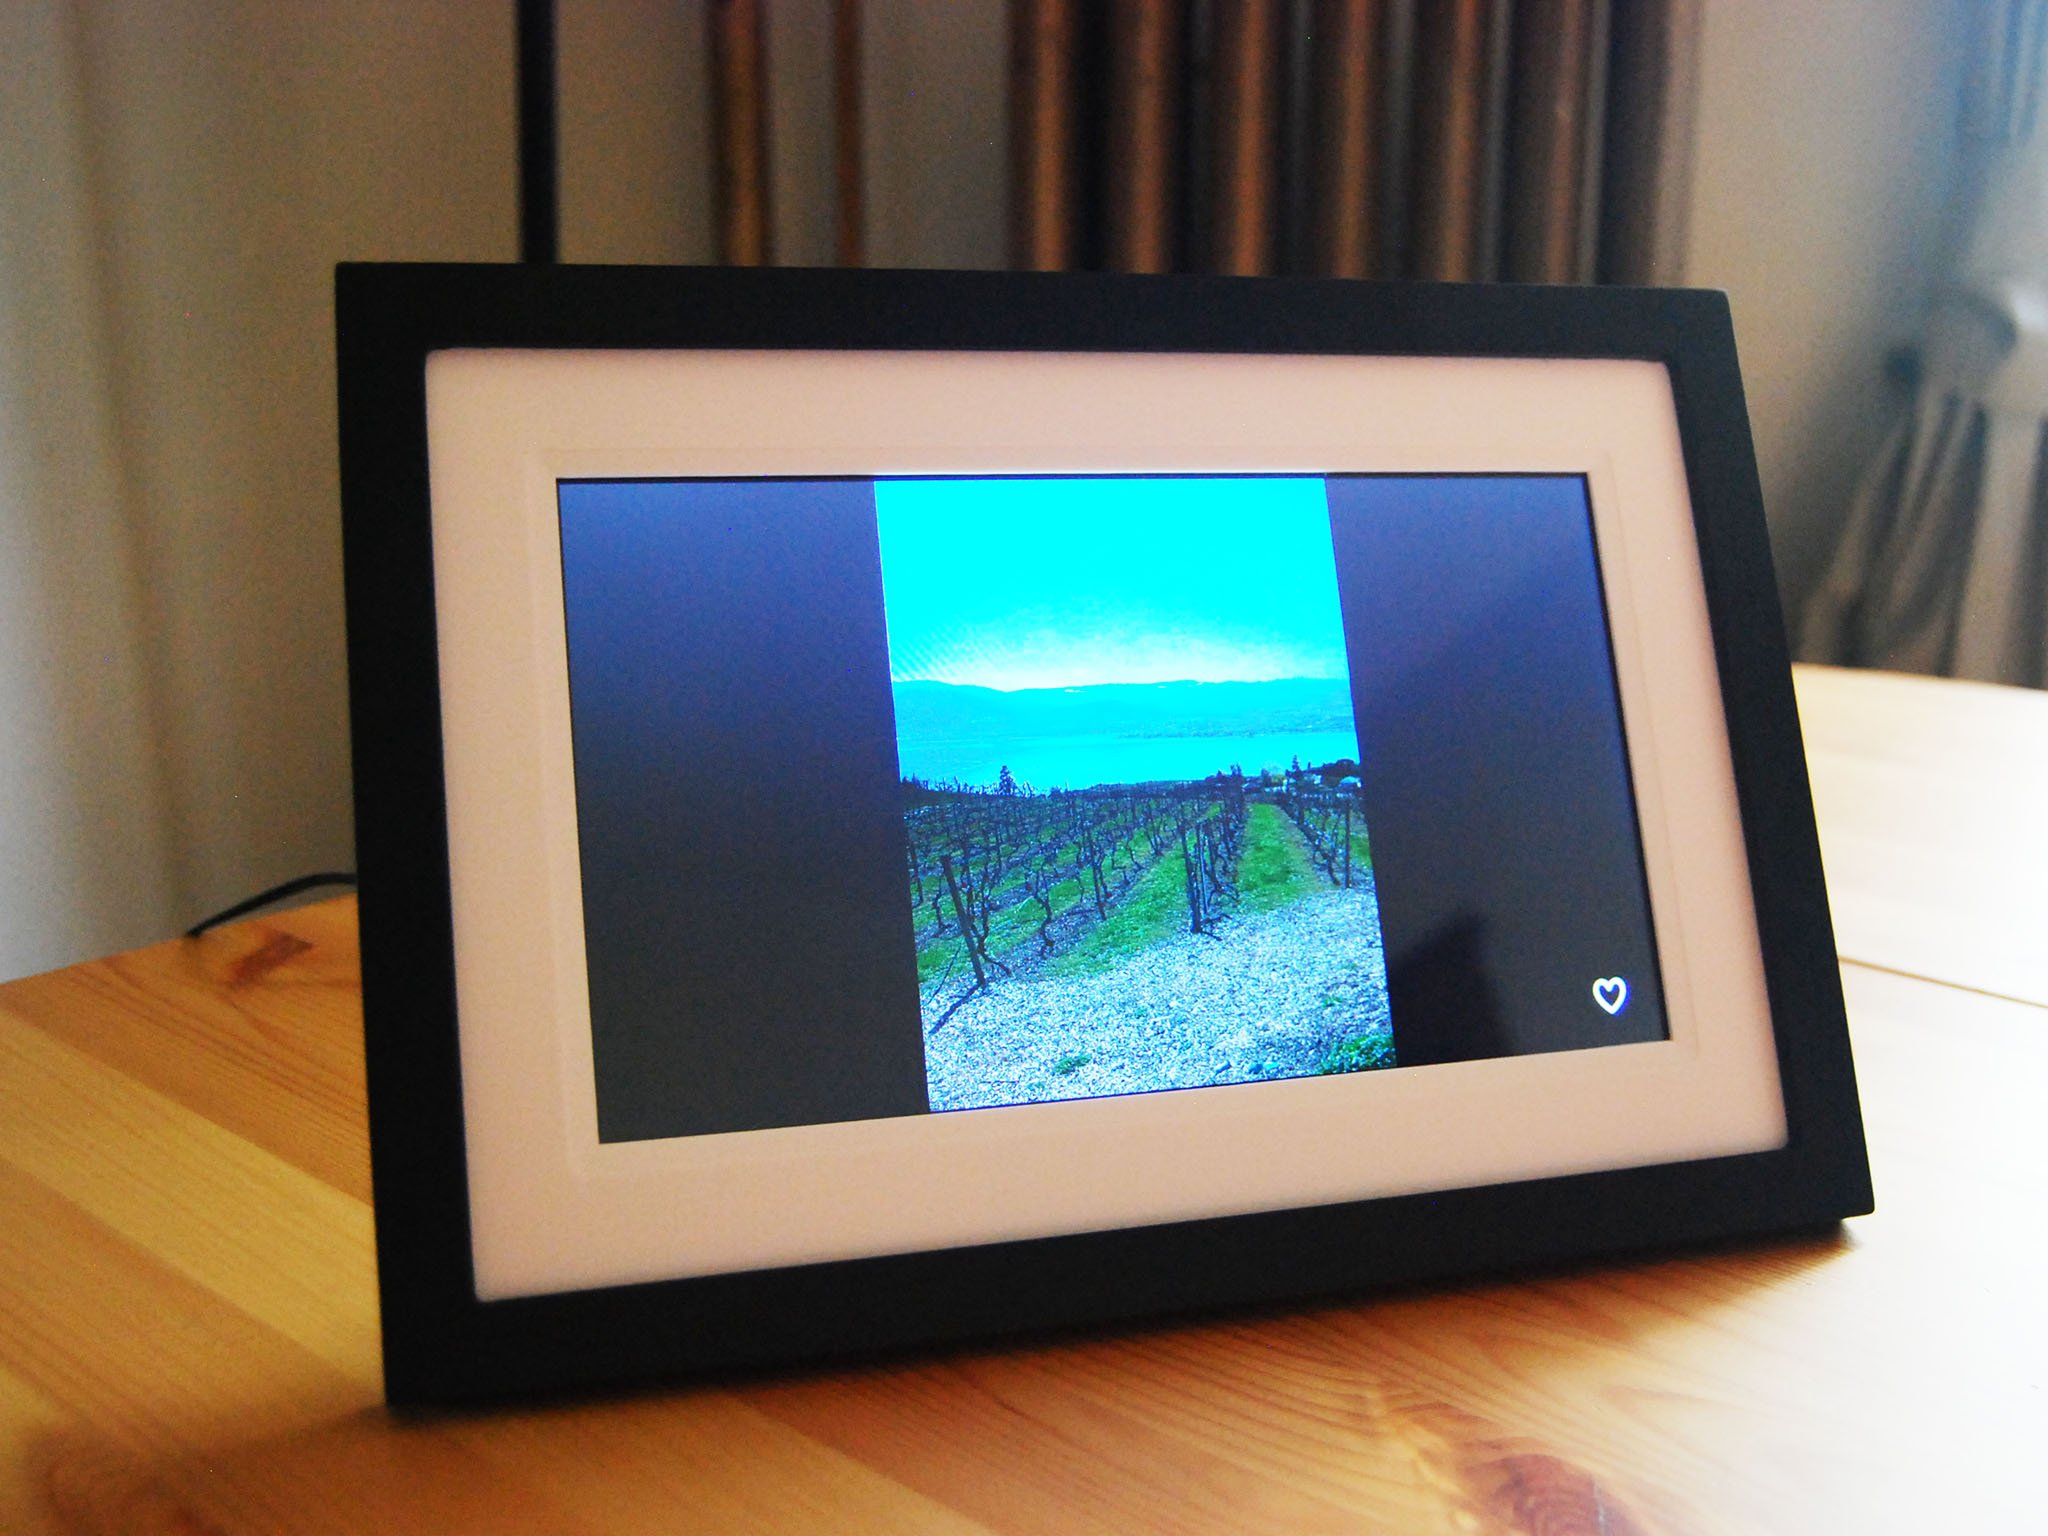 Skylight Frame review: Foolproof but lacking features